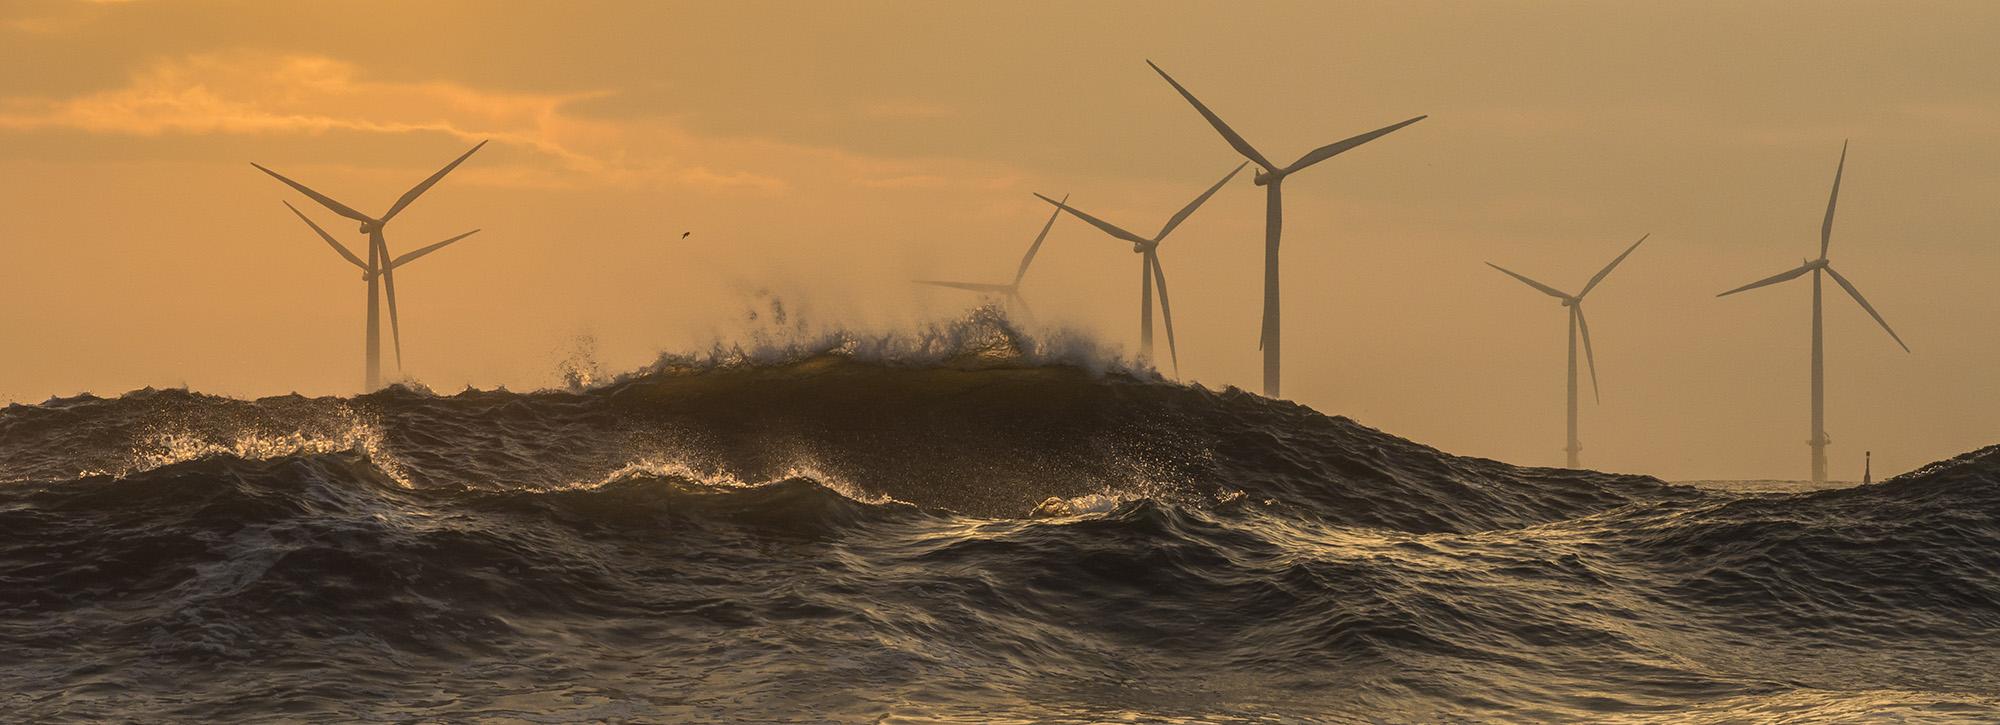 View of offshore wind farm in stormy weather